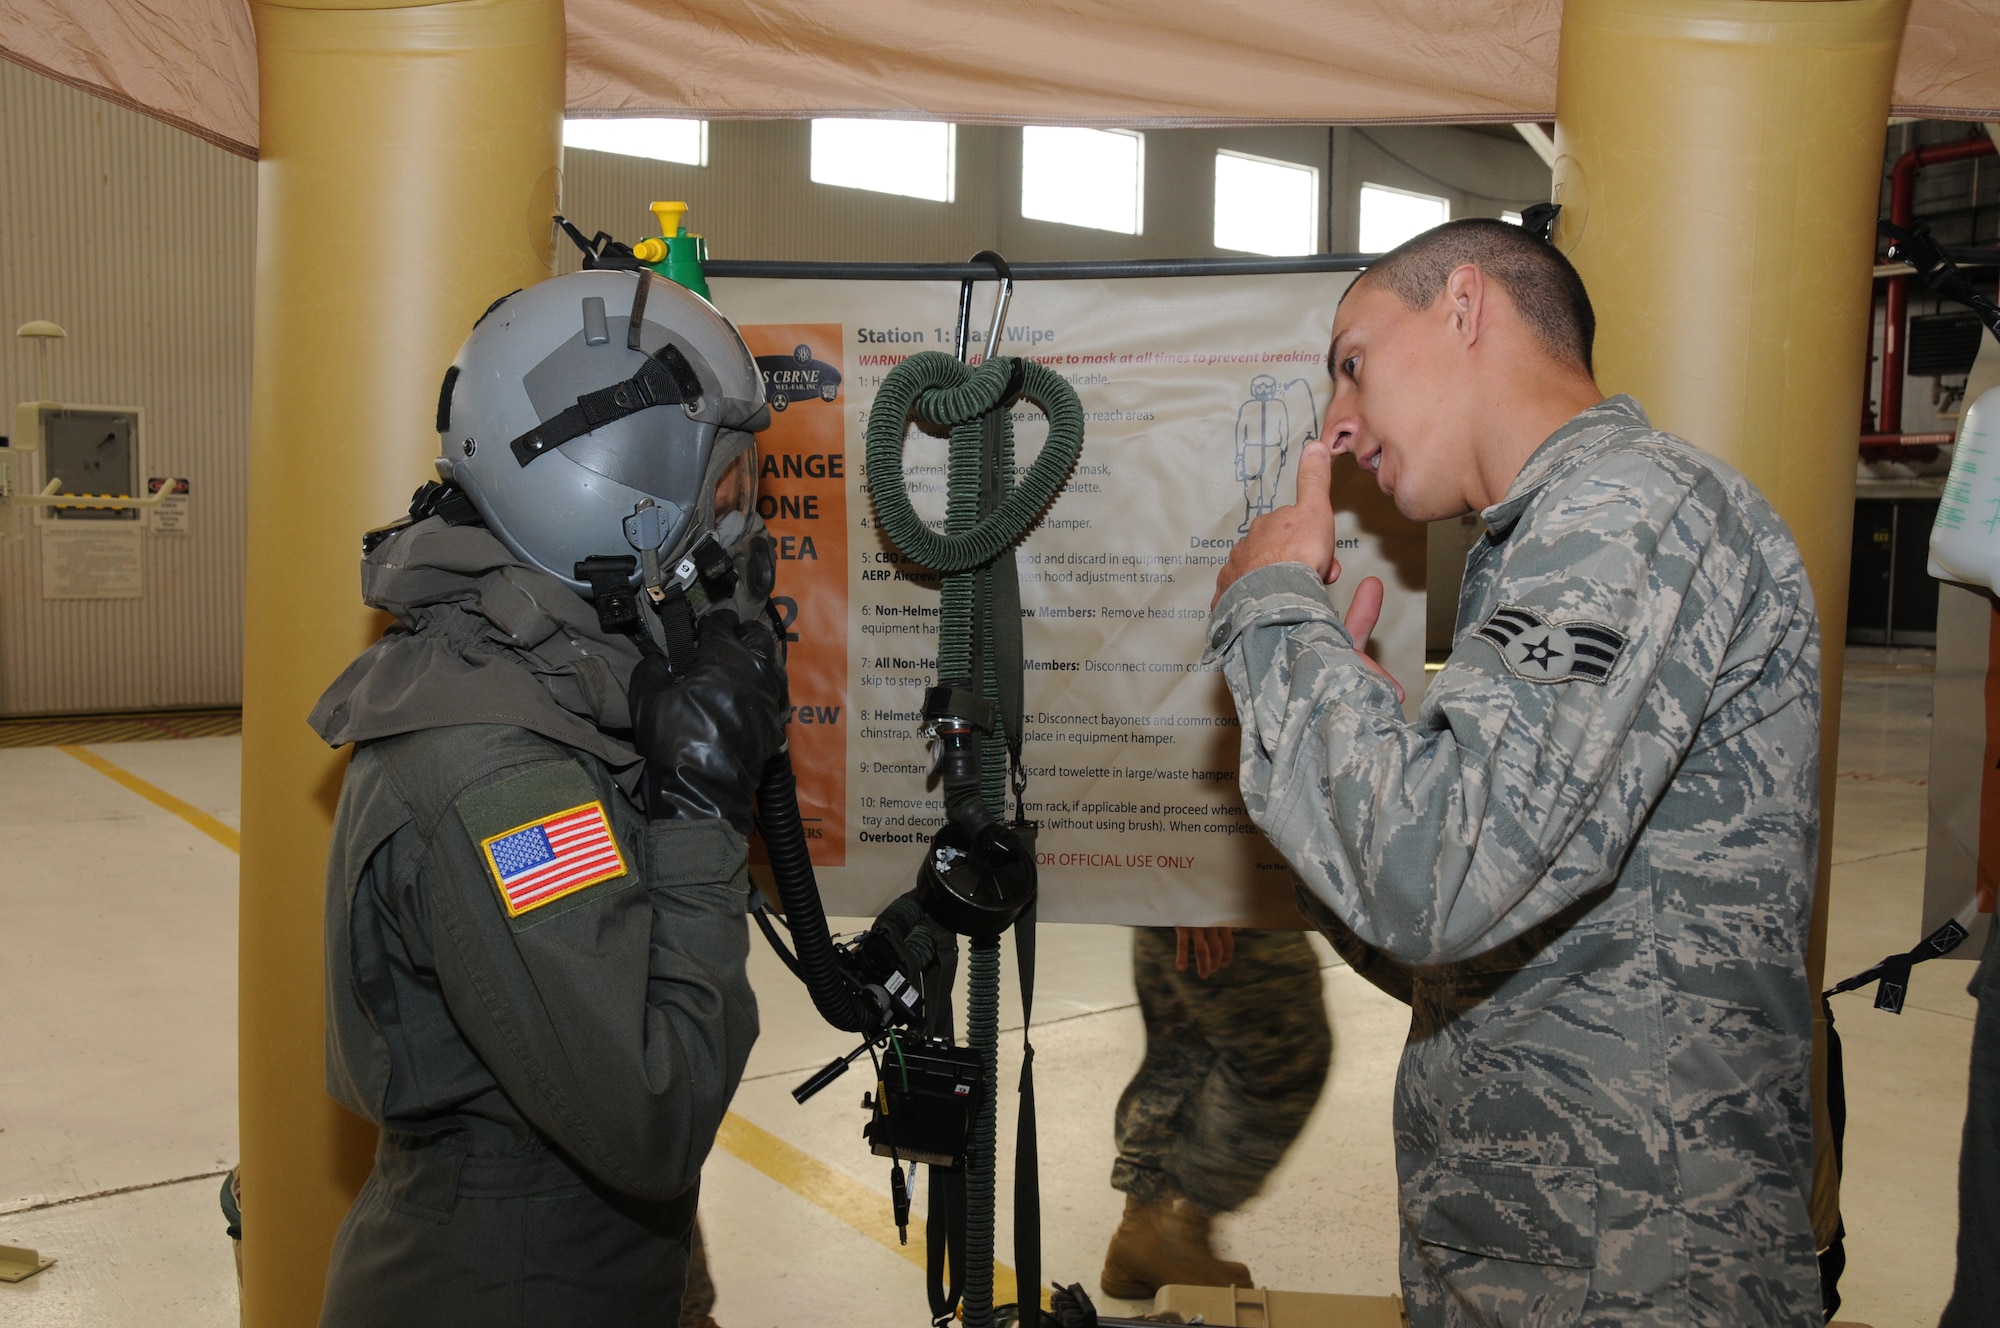 Senior Airman Shawn Niemira from the 107th Aircrew Flight Equipment Squadron instructs loadmaster Tech. Sgt. Katie Swanick from the 136th Airlift Squadron the proper technique in removal of flight helmet/mask. The two were part of an operational readiness exercise recently conducted in preparation for the upcoming operational readiness inspection. (U.S. Air Force photo/Staff Sgt. Peter Dean) 